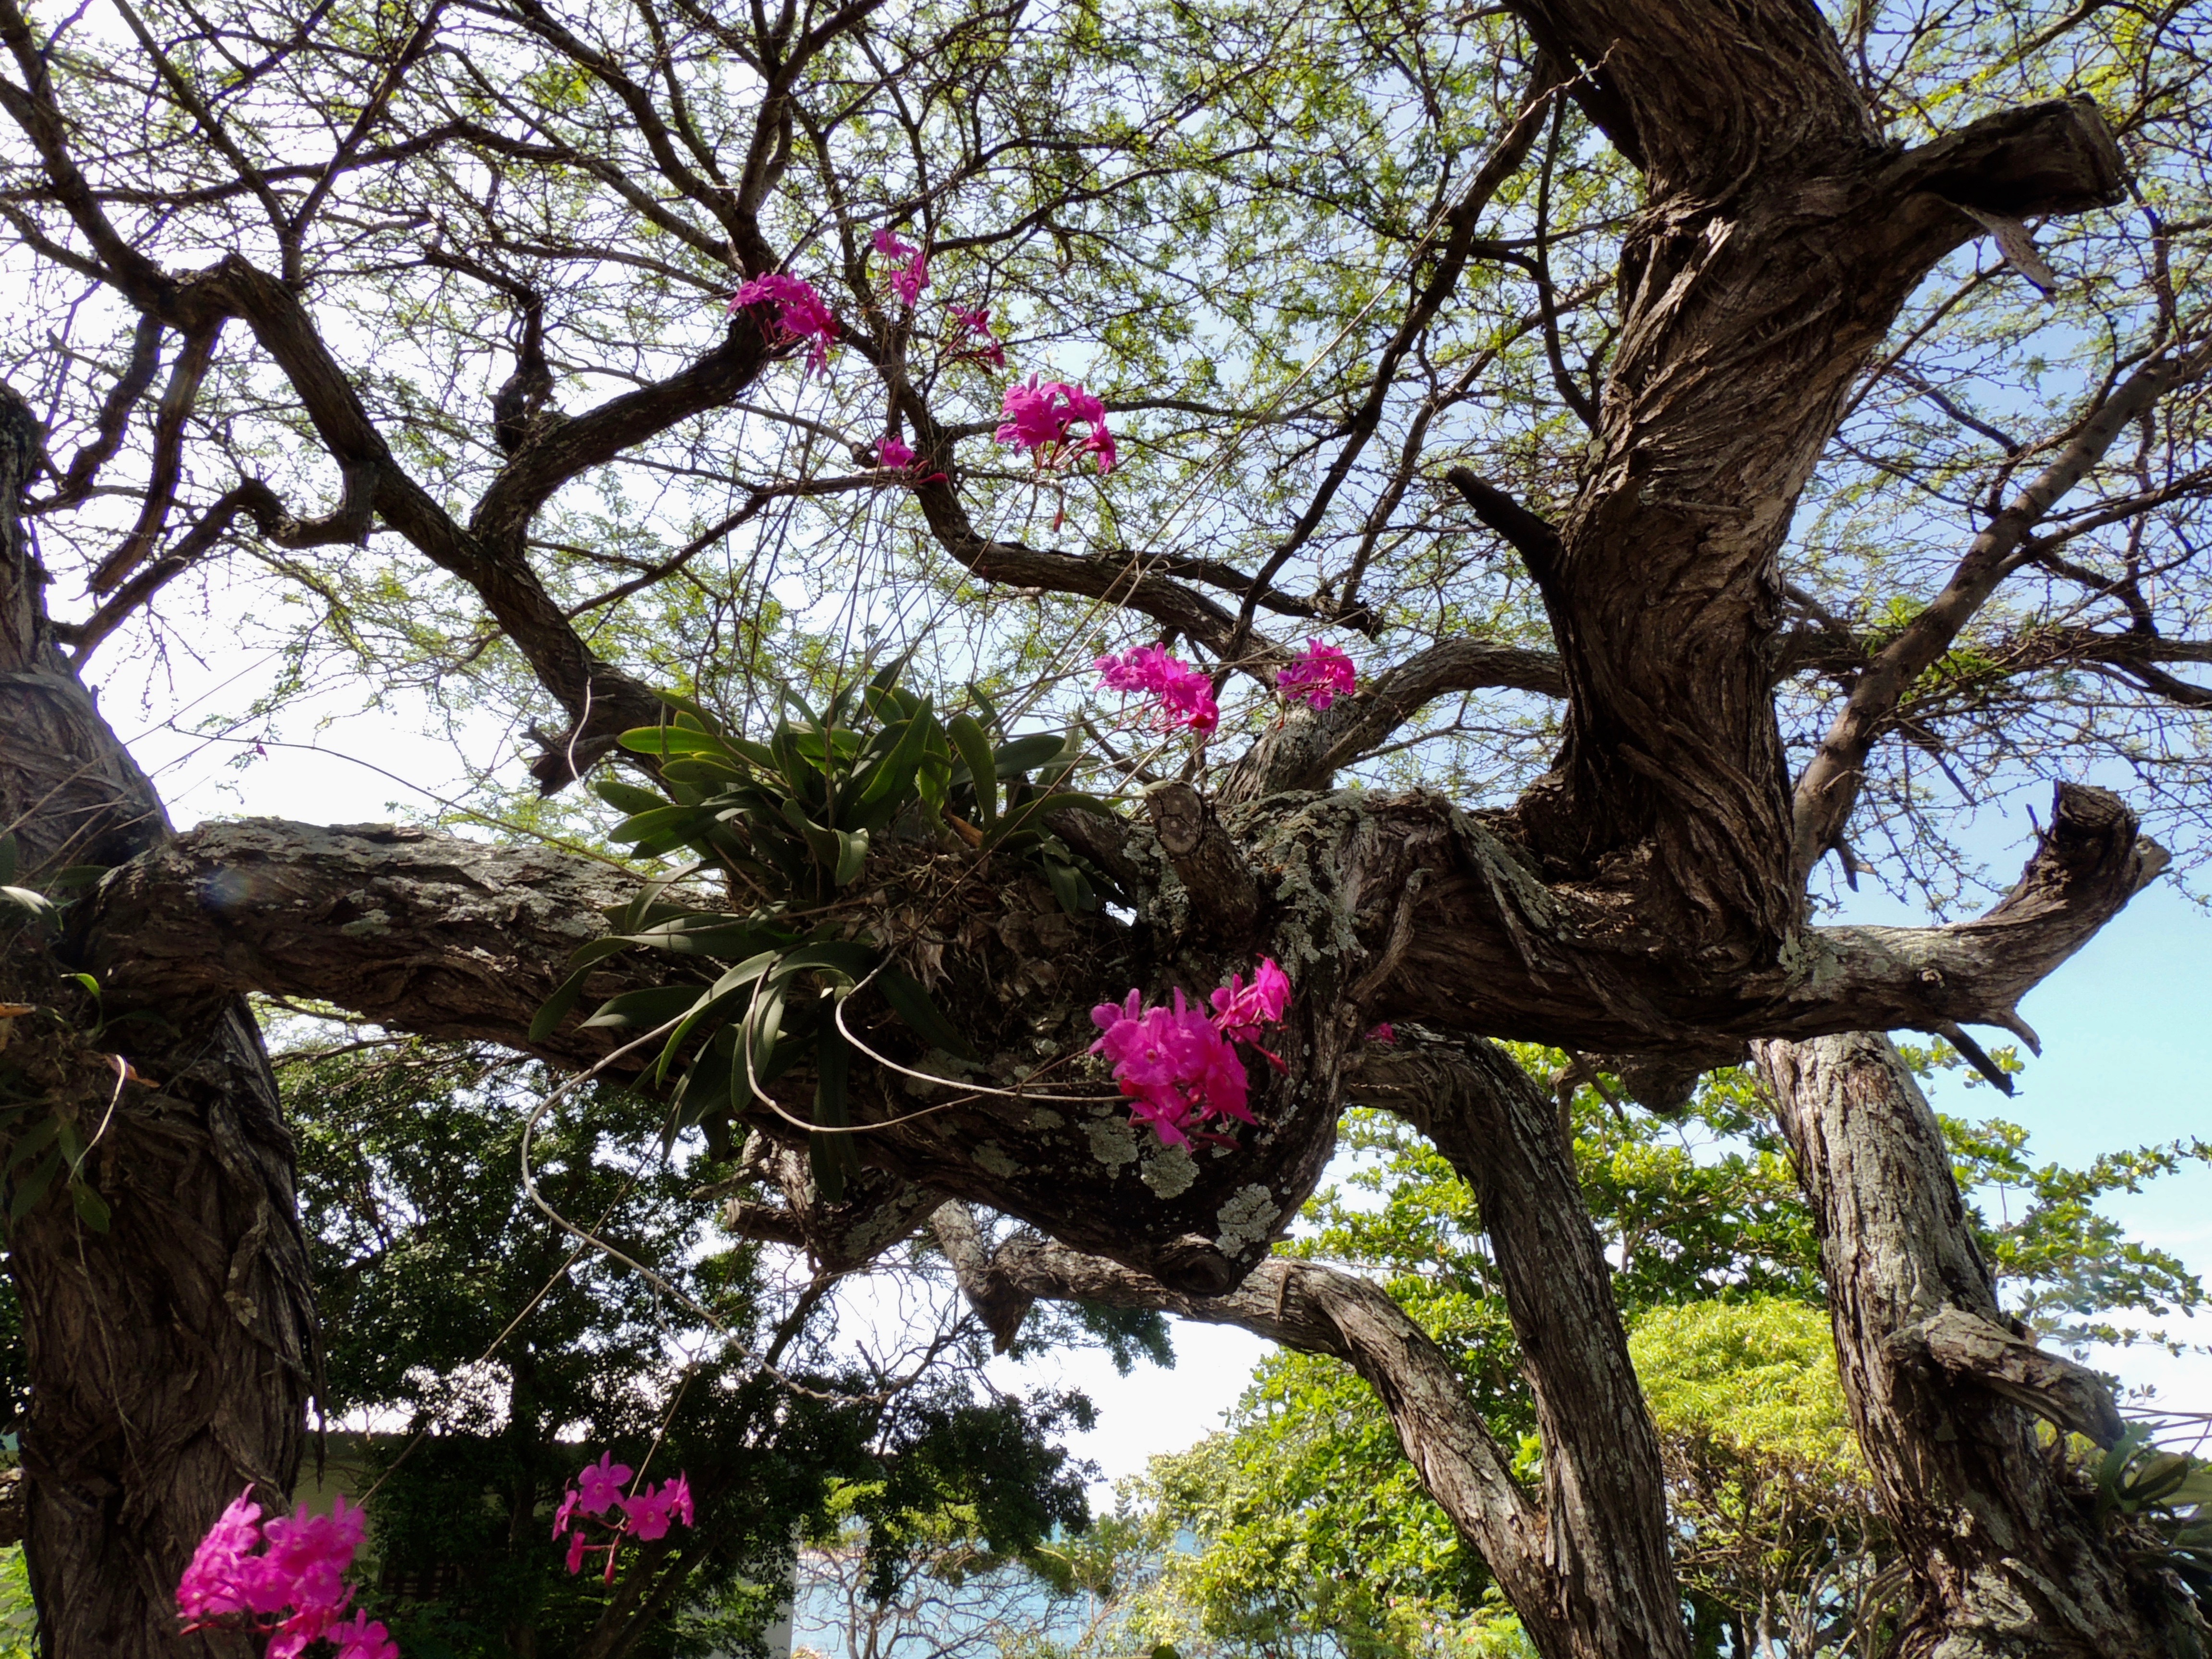 The flowers are blooming all year long in Treasure Beach, Jamaica, my expat home.